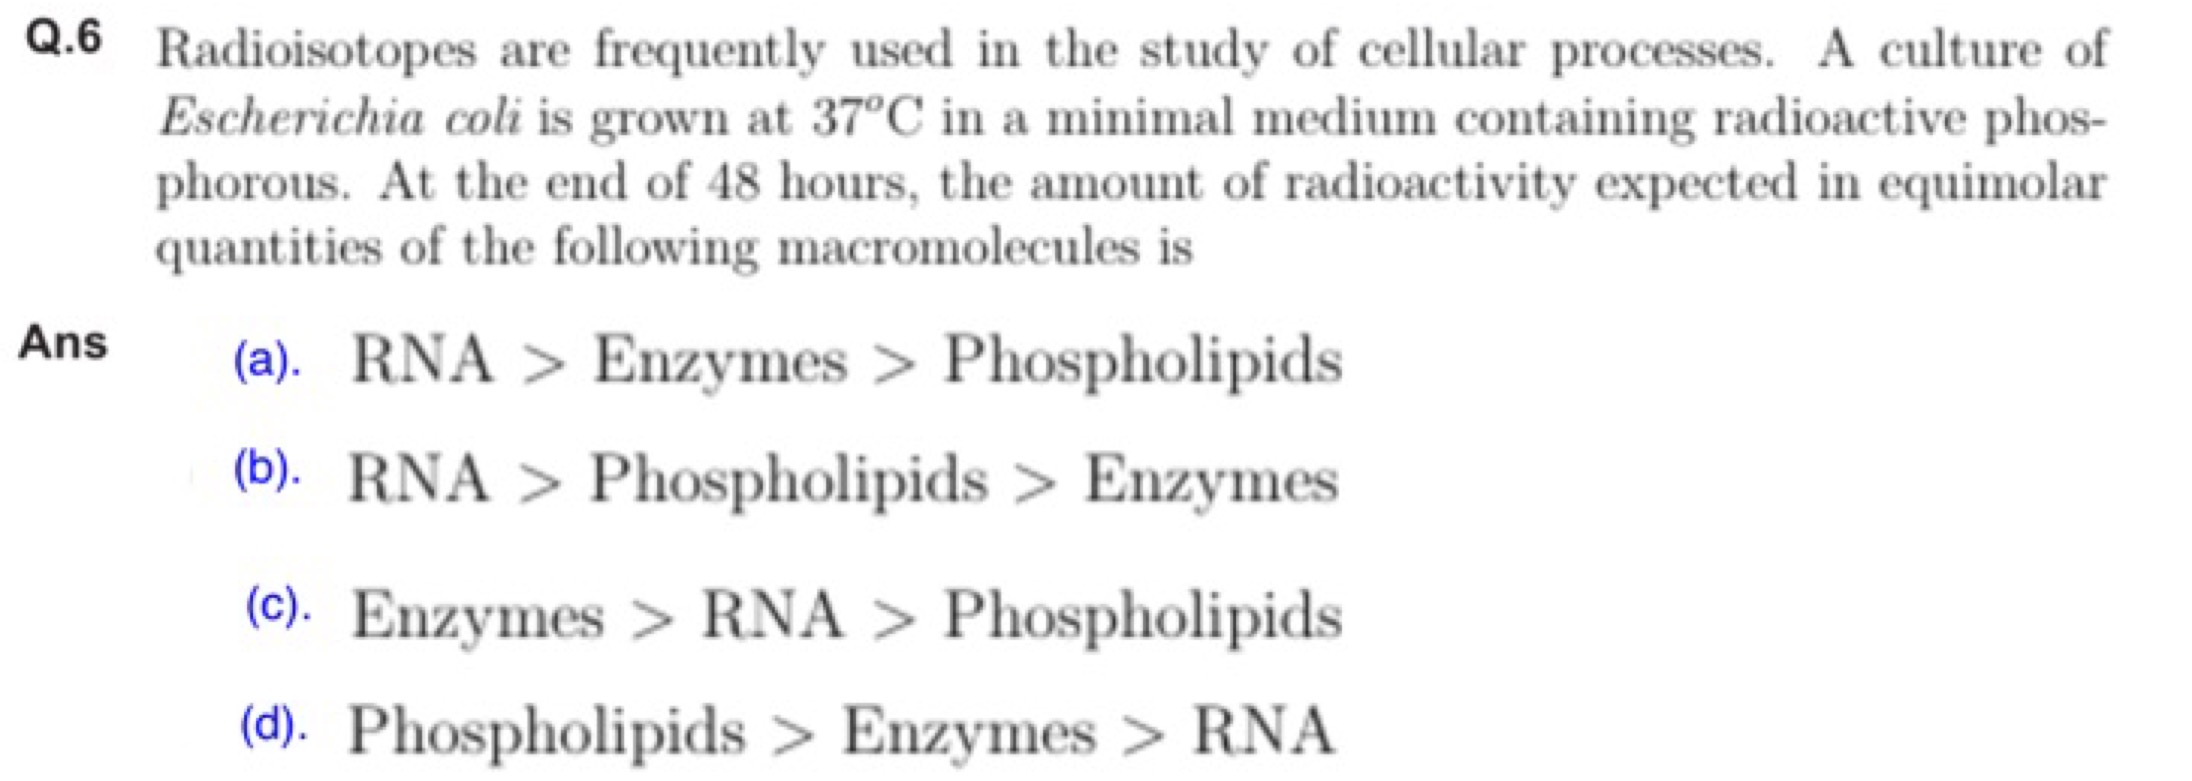 Q.6 Radioisotopes are frequently used in the study of cellular process